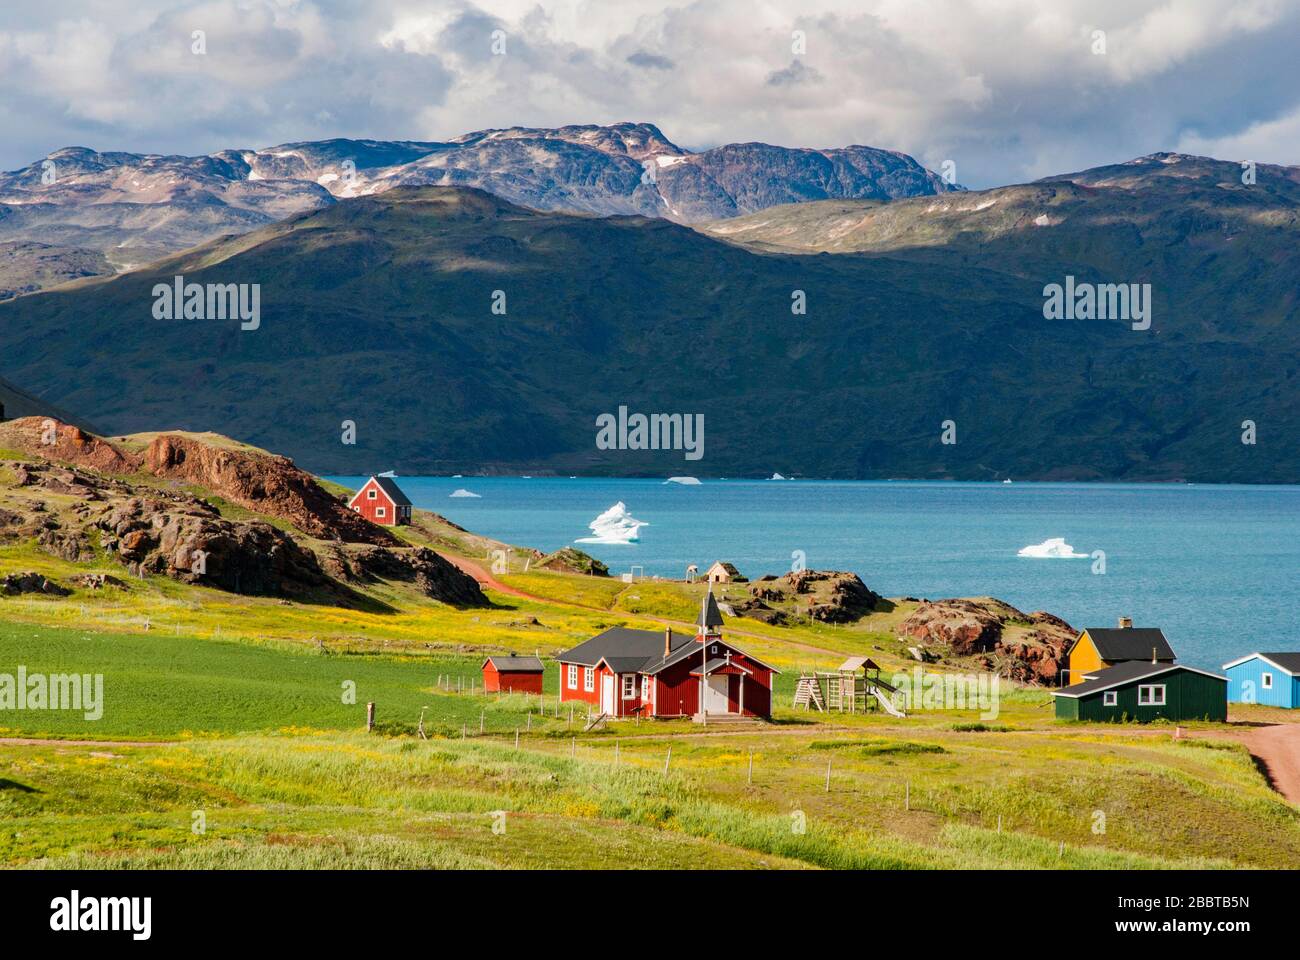 View of Narsarsuaq and fjord from above hill. Summer in Greenland. In the background mountains and blue sky with some clouds. Stock Photo